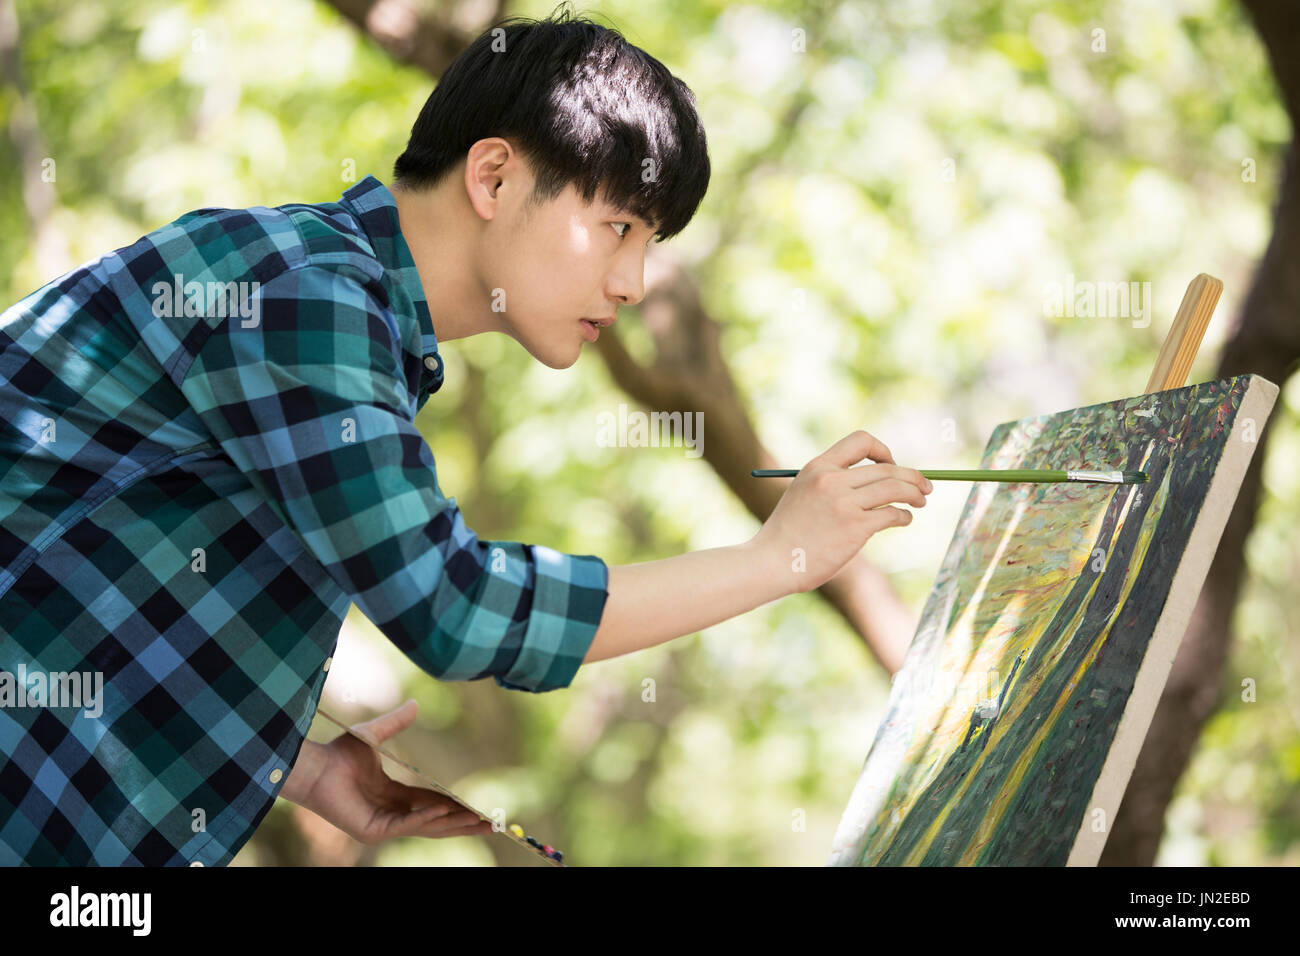 Young man painting outdoors Stock Photo